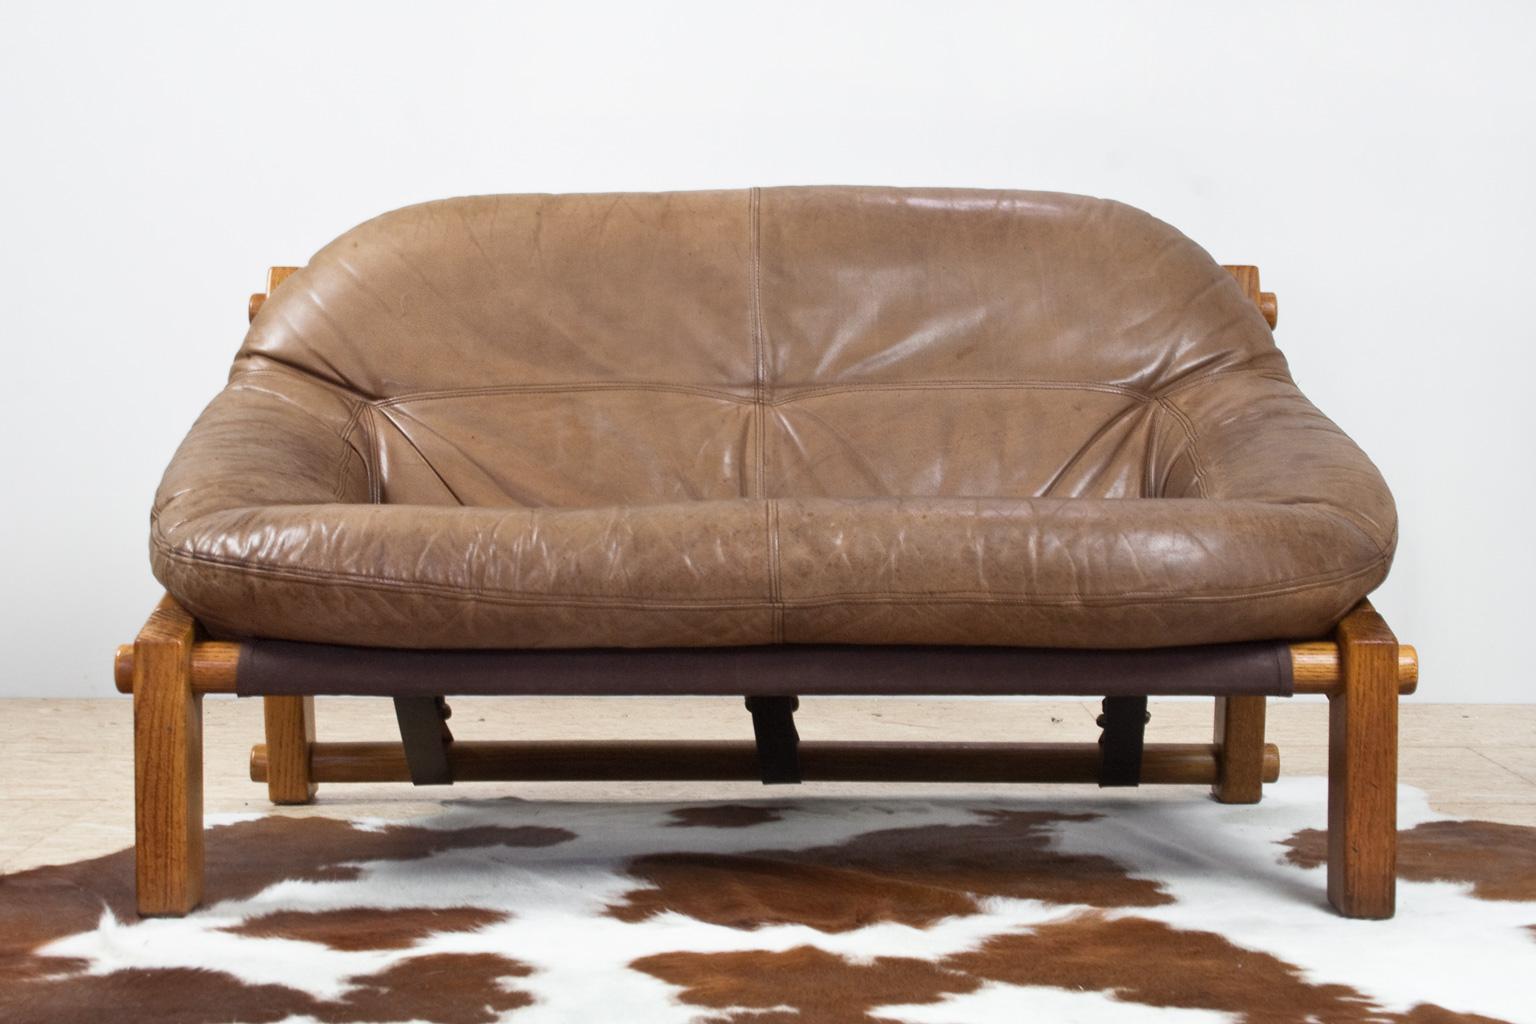 Two-seat Brutalist sofa in soft toned brown leather designed by Dutch designer Gerard Van Den Berg in the 1970s. This two person sofa is brutally oversized with a clear view of the solid pine wooden construction. The leather straps in the back are